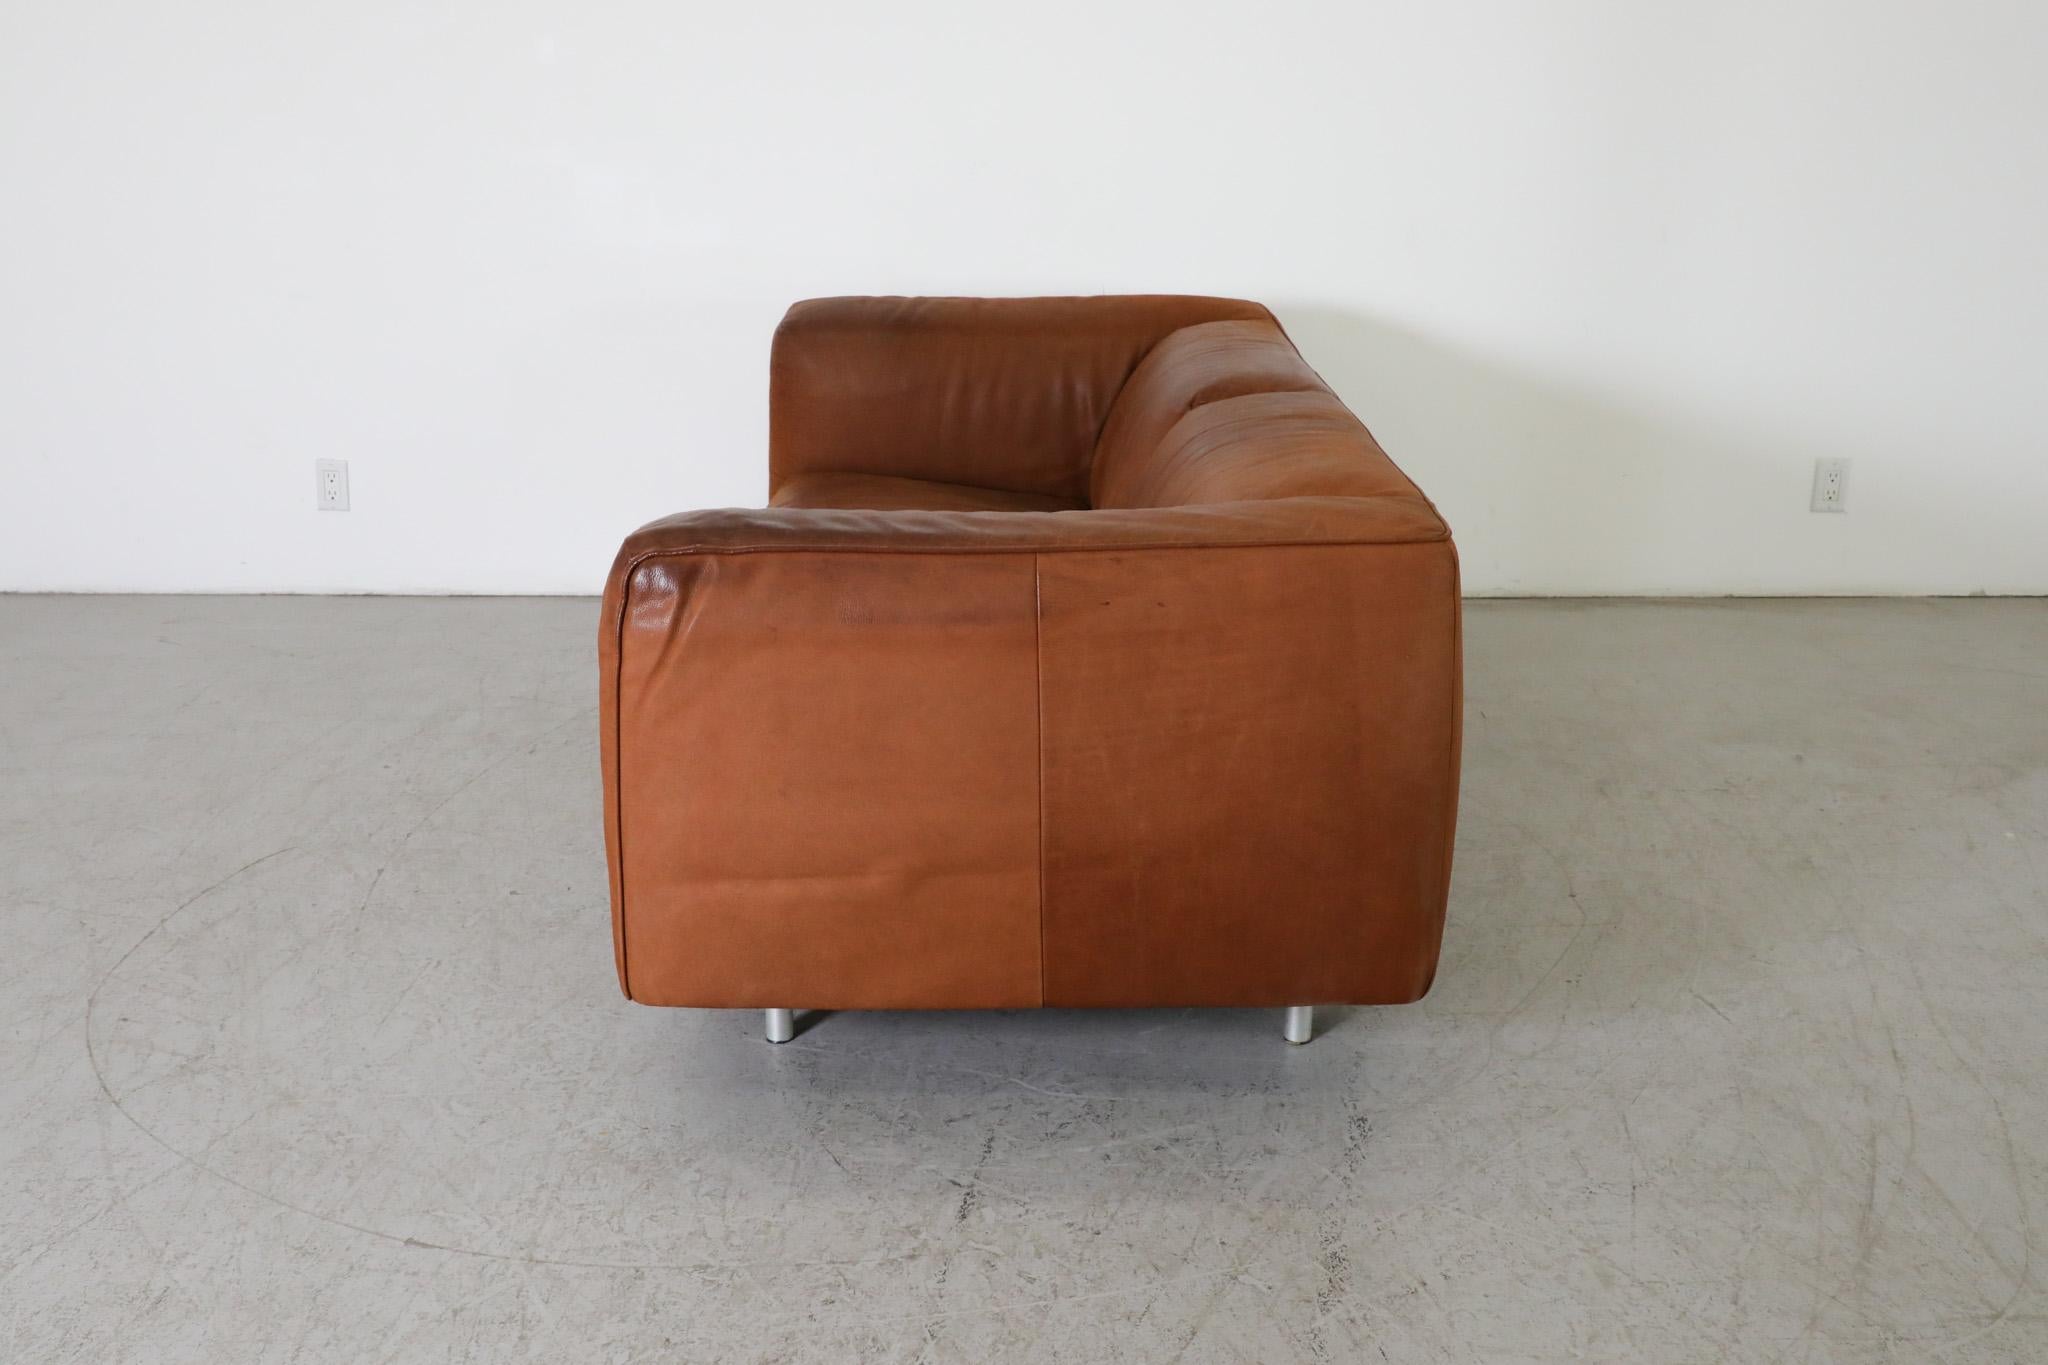 Gerard van den Berg Cognac Leather Soft Form Sofa with Aluminum Legs  In Good Condition For Sale In Los Angeles, CA